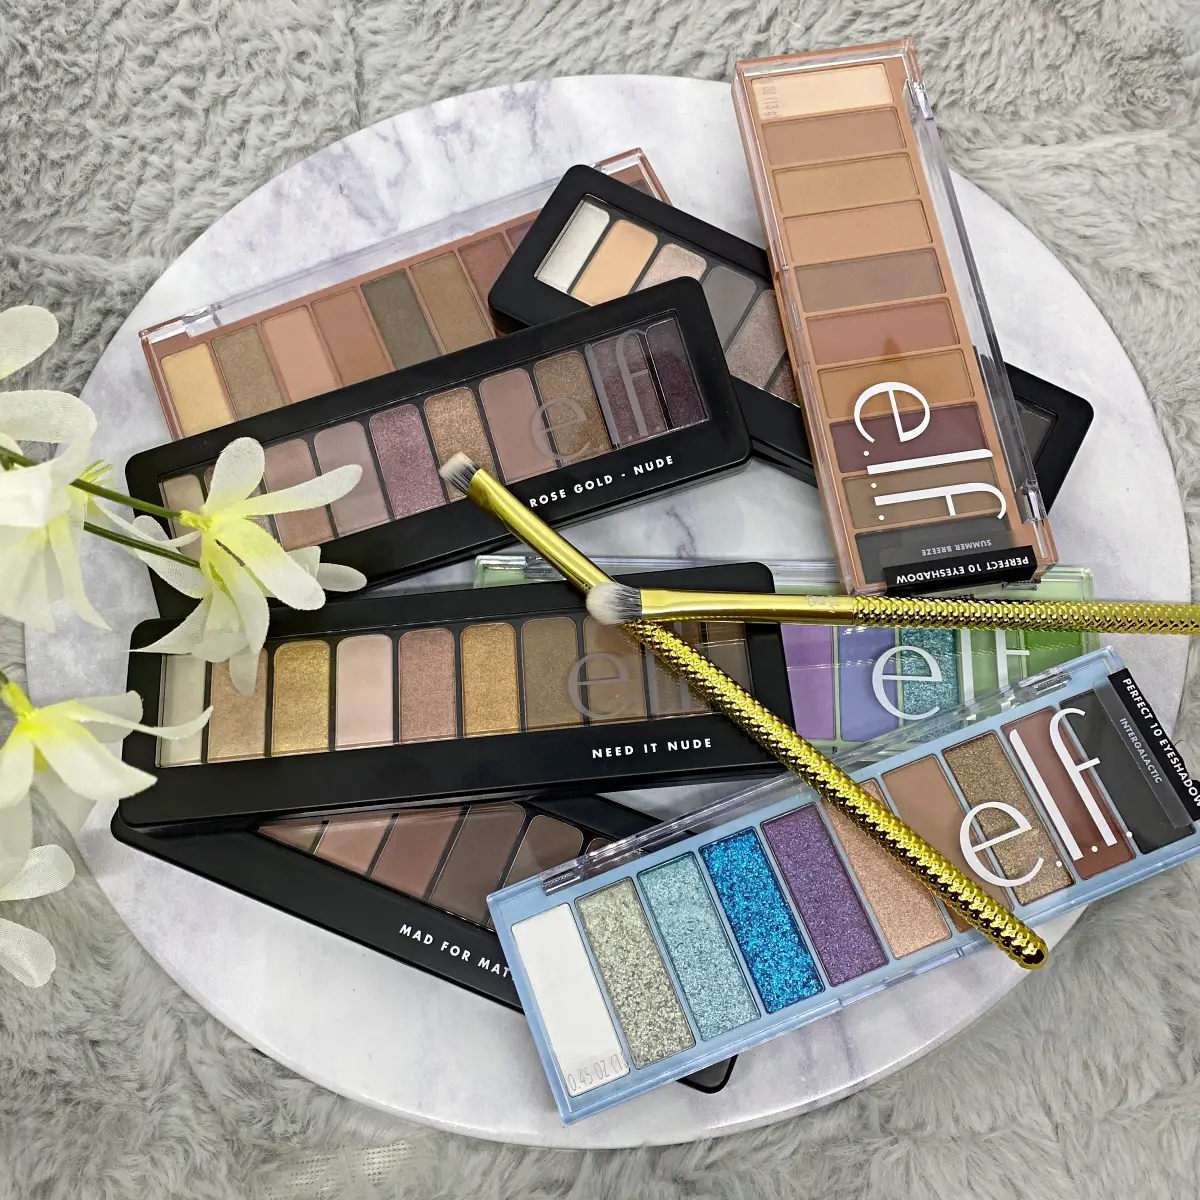 elf Perfect 10 Eyeshadow Palette review